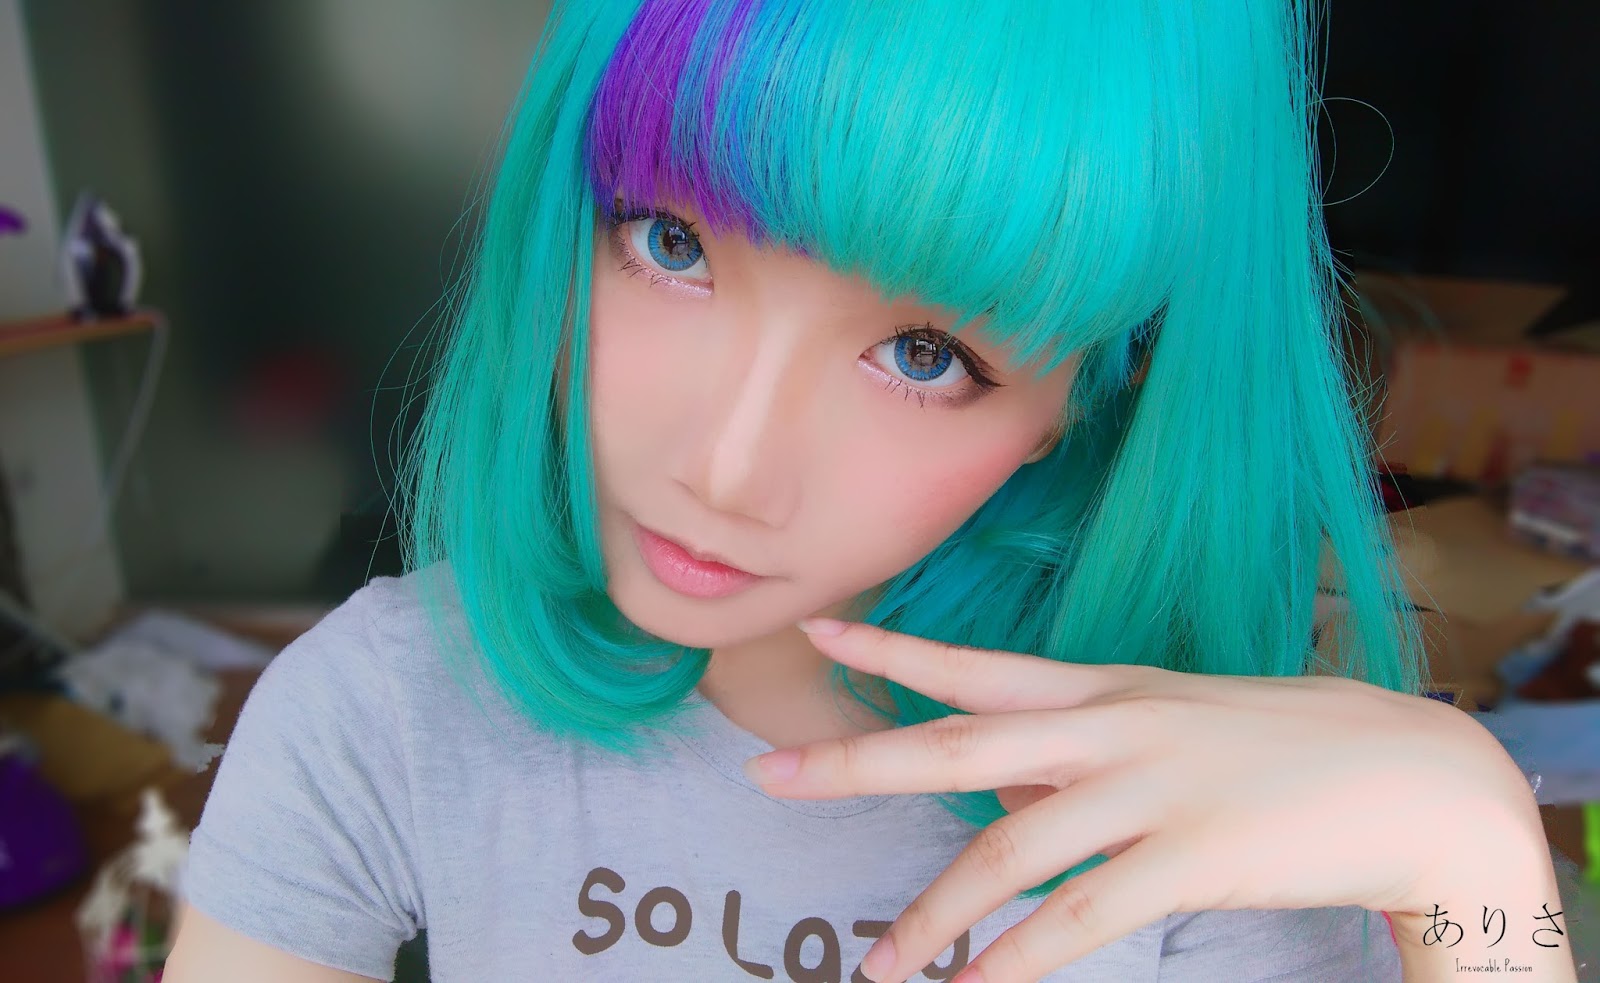 What color is hatsune miku's hair